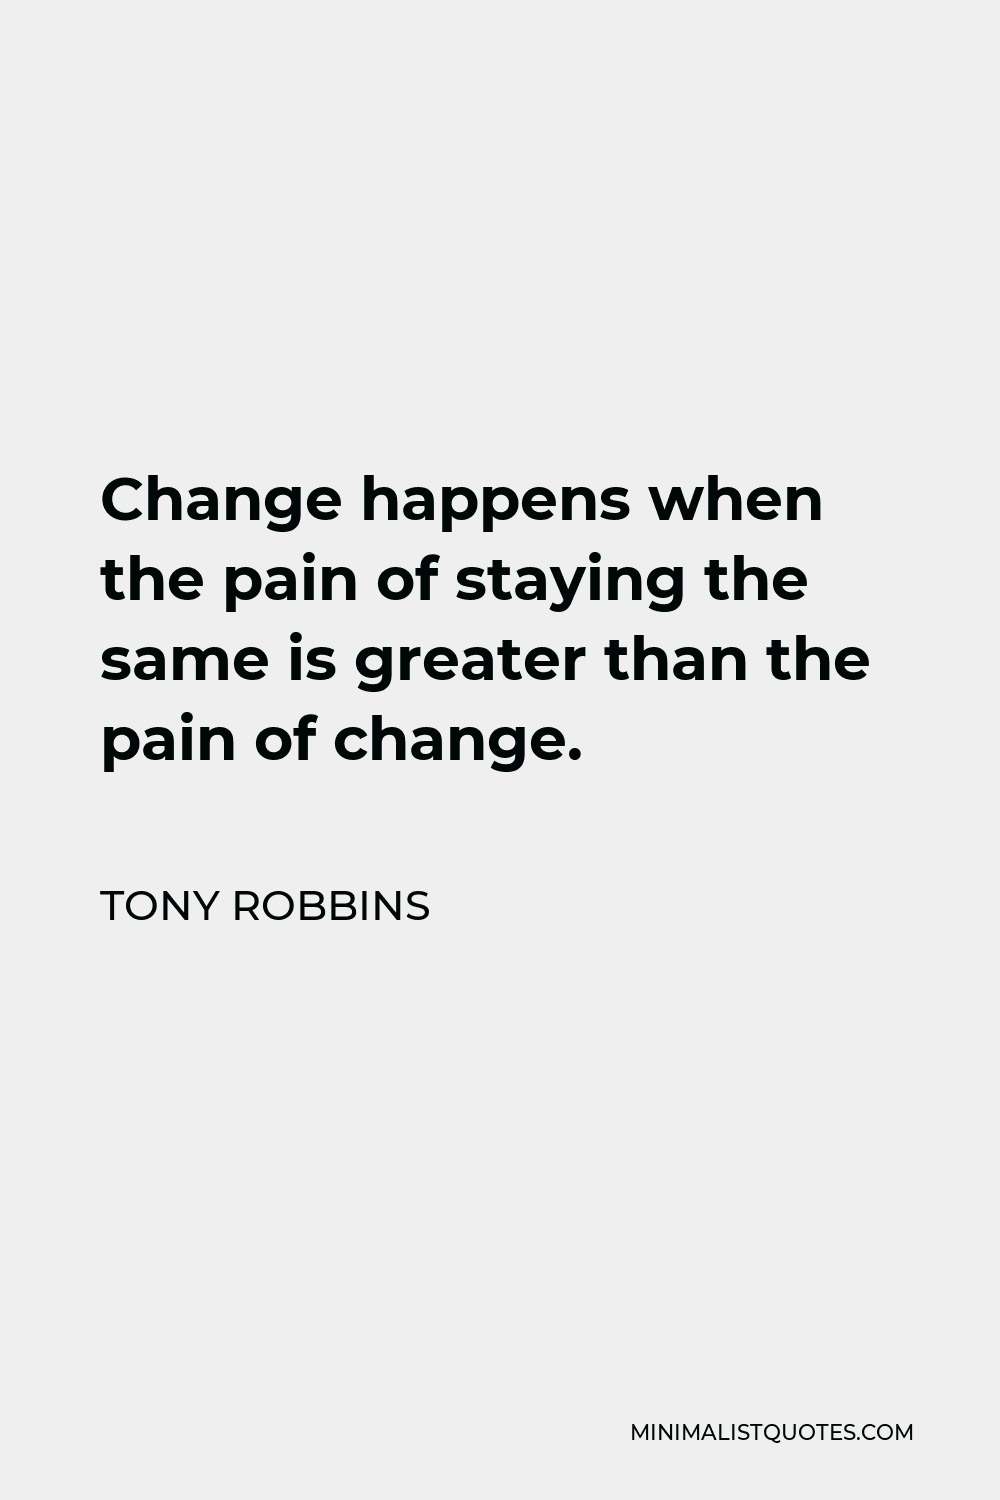 Tony Robbins Quote - Change happens when the pain of staying the same is greater than the pain of change.